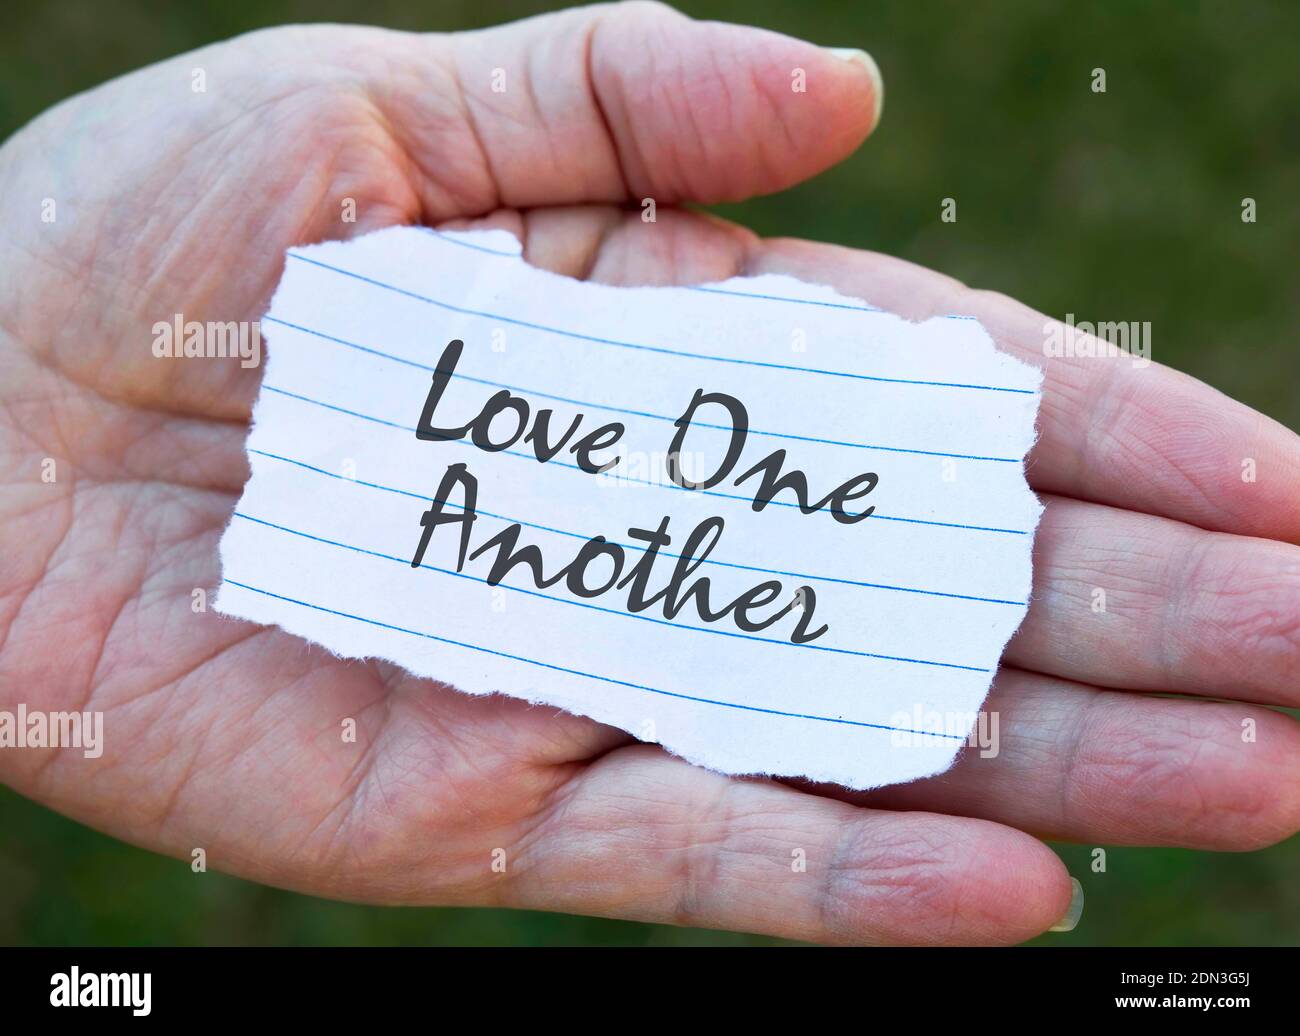 Love One Another. Stock Photo